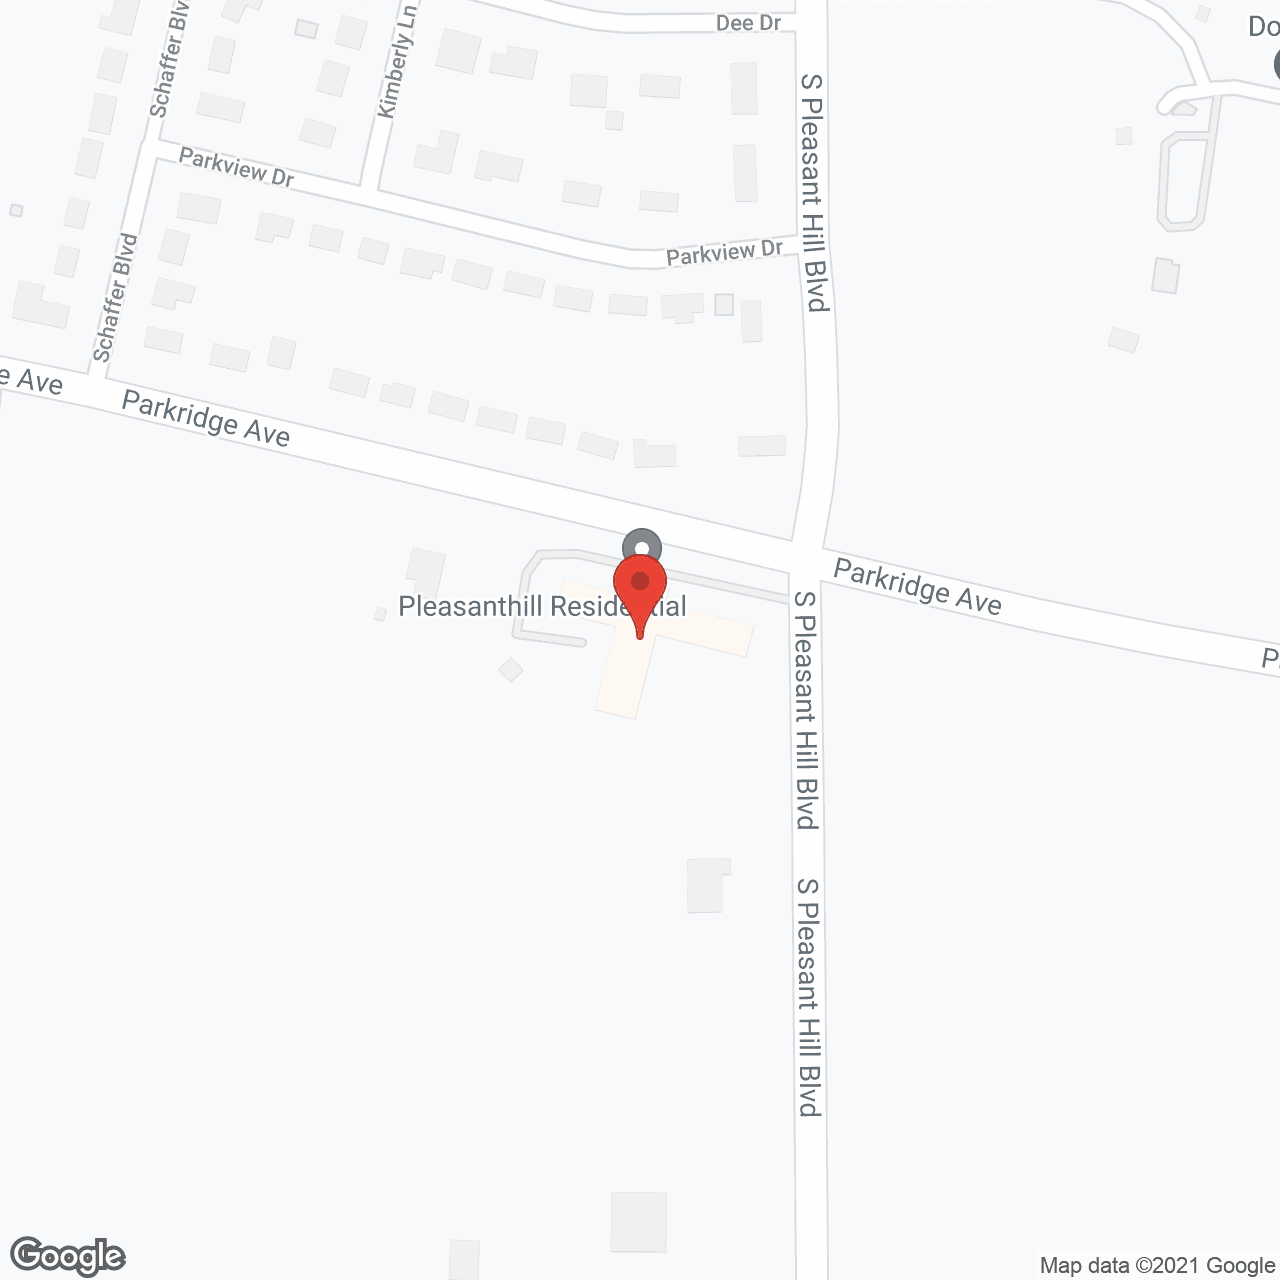 Pleasant Hill Residential in google map